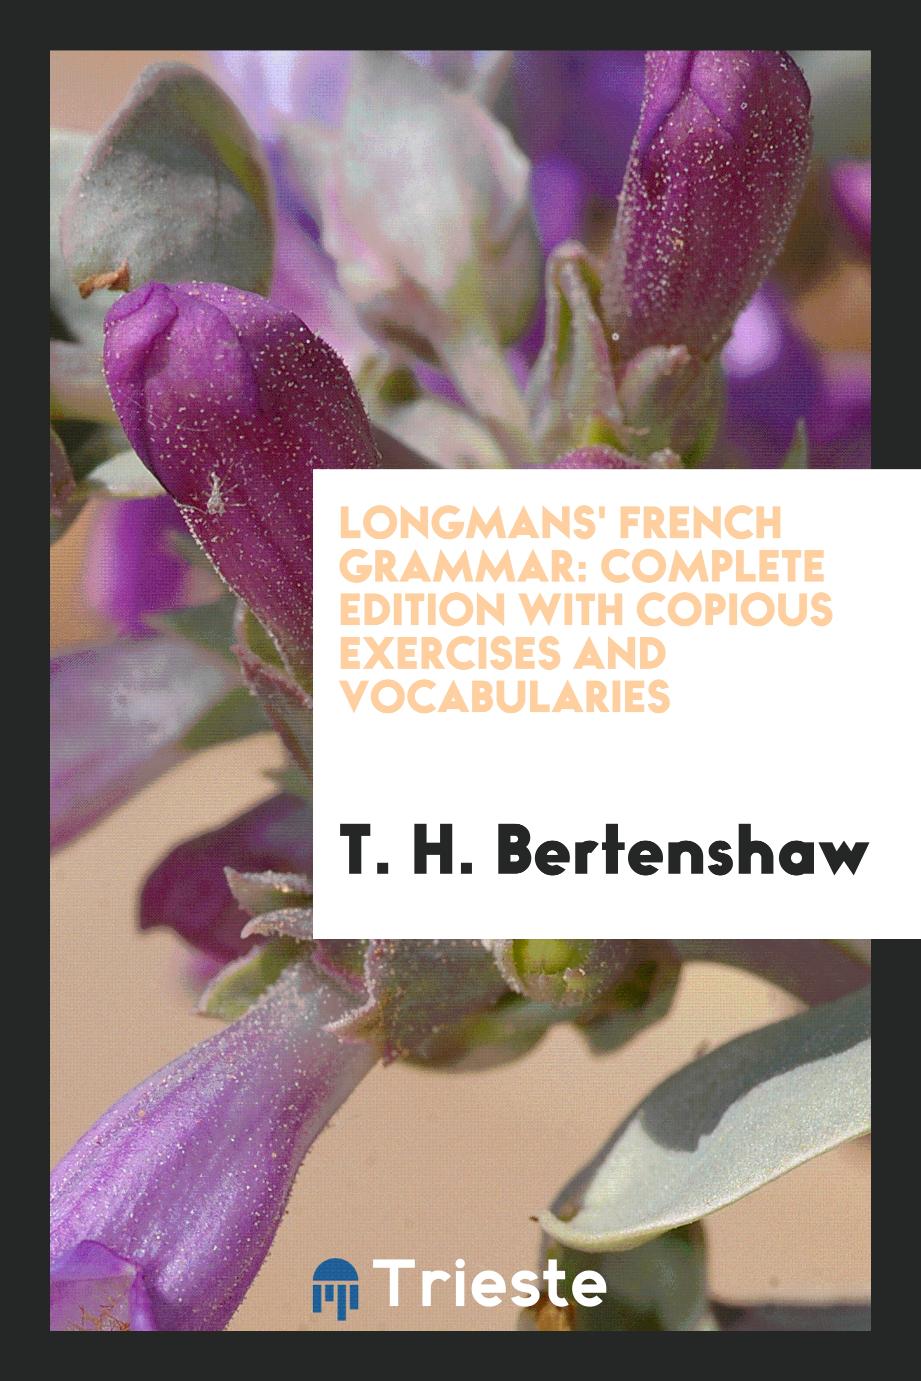 Longmans' French Grammar: Complete Edition with Copious Exercises and Vocabularies